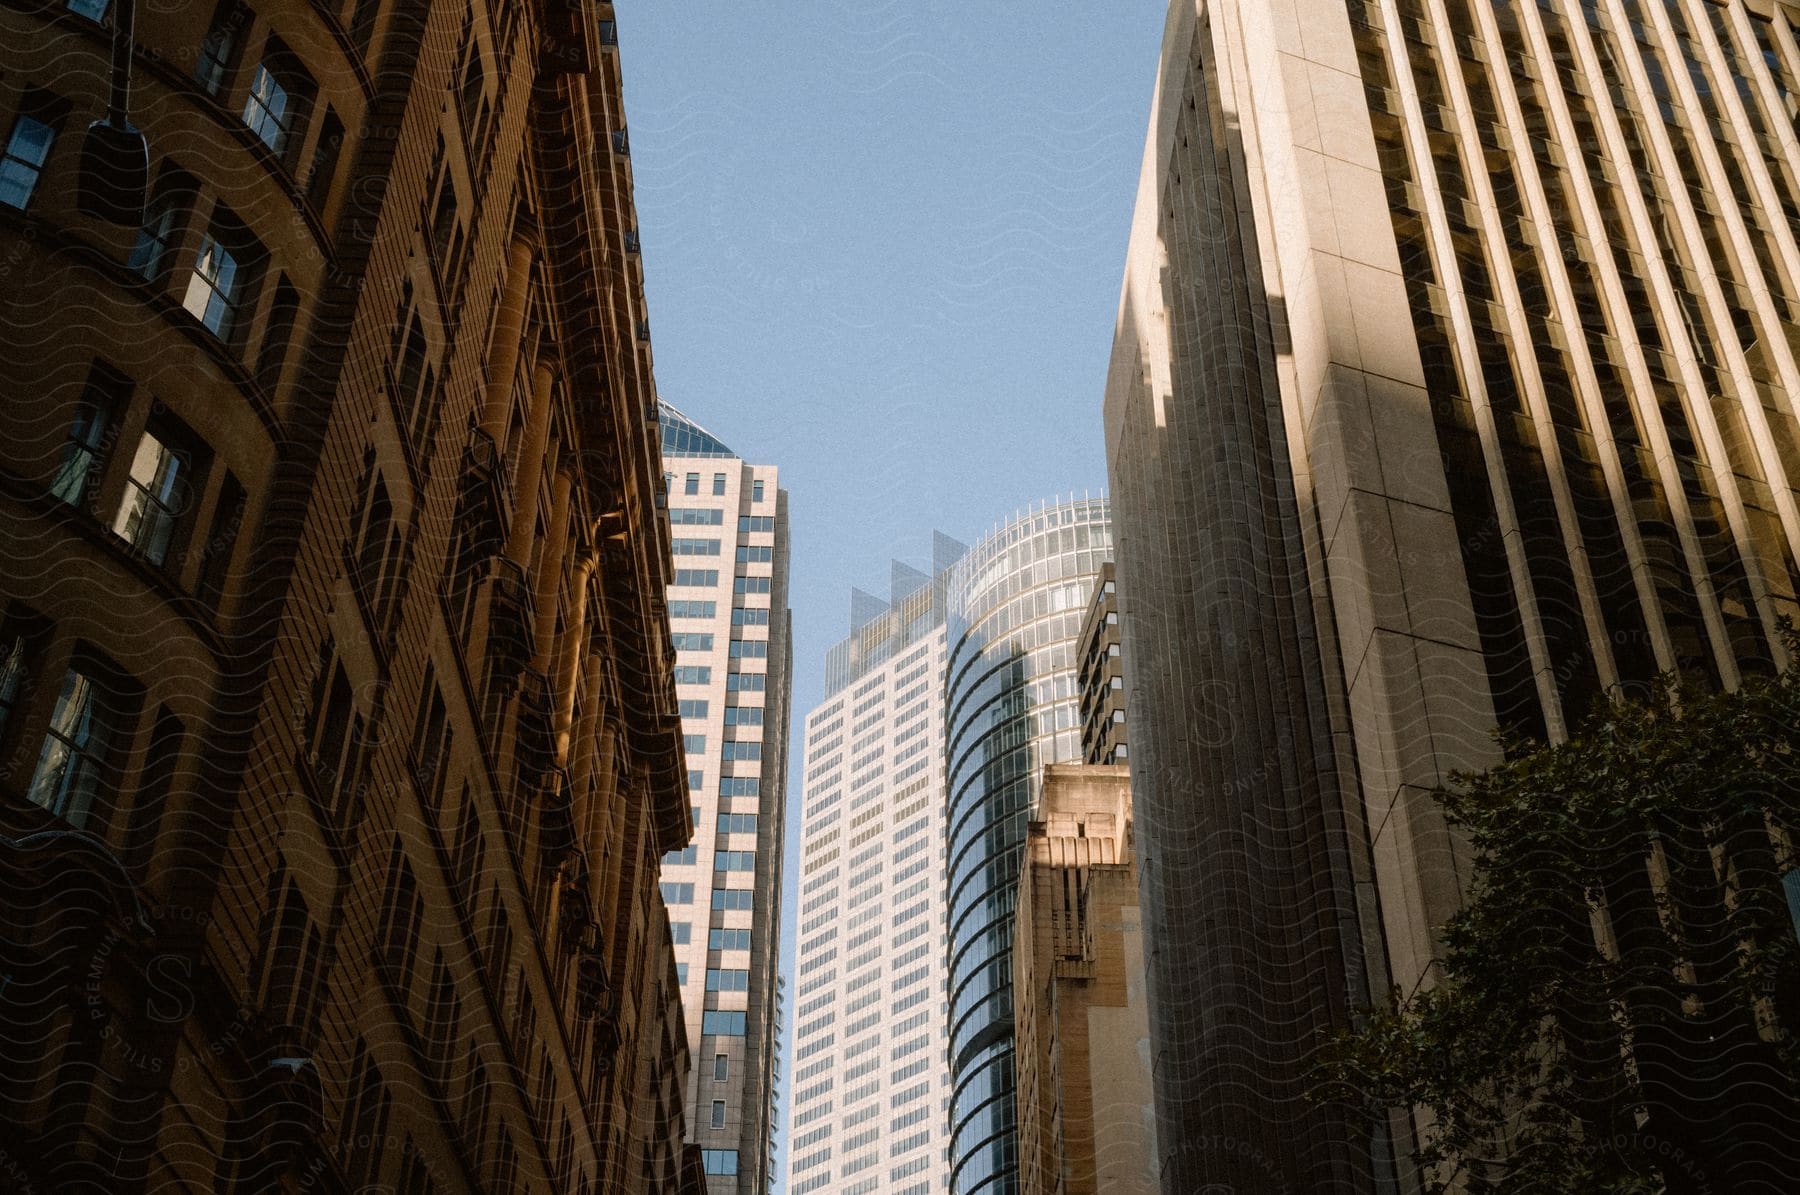 Several tall buildings in a city on a sunny day.